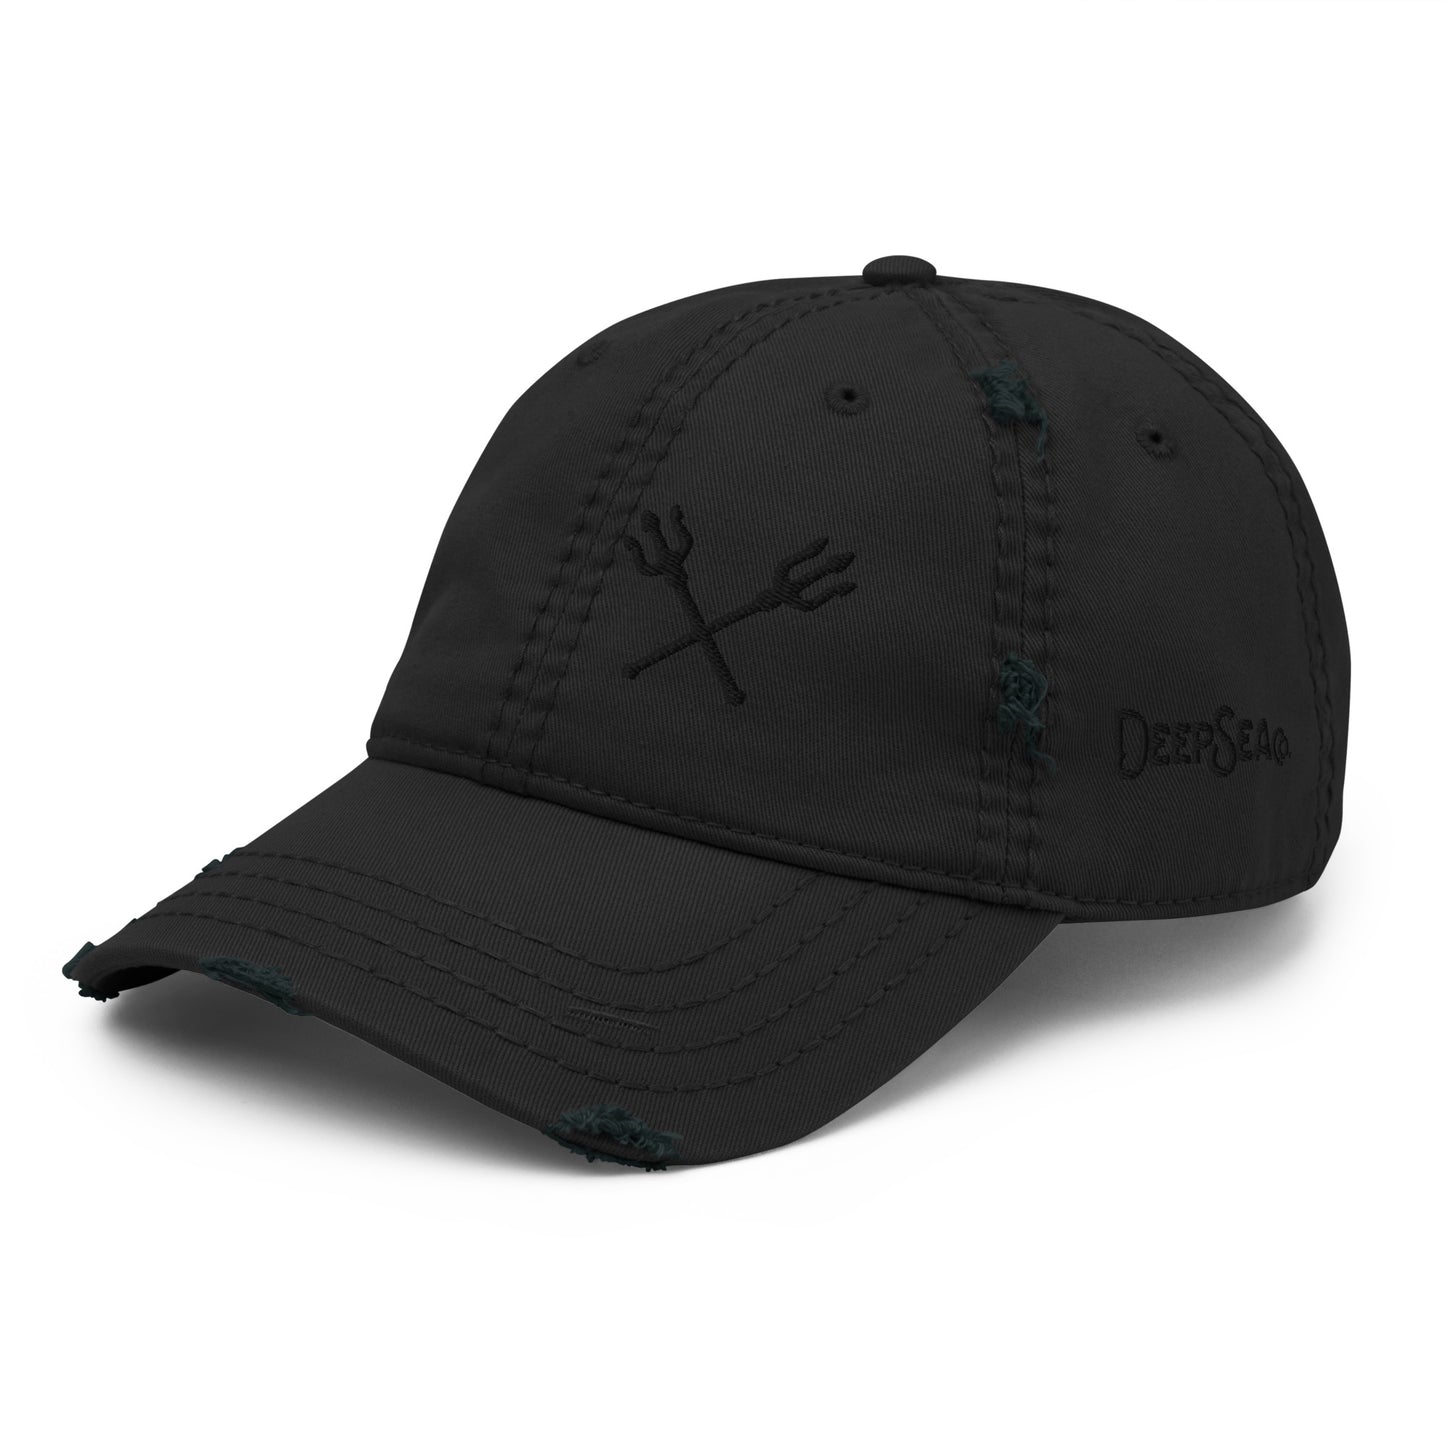 Distressed DeepSea Co. Dad Hat